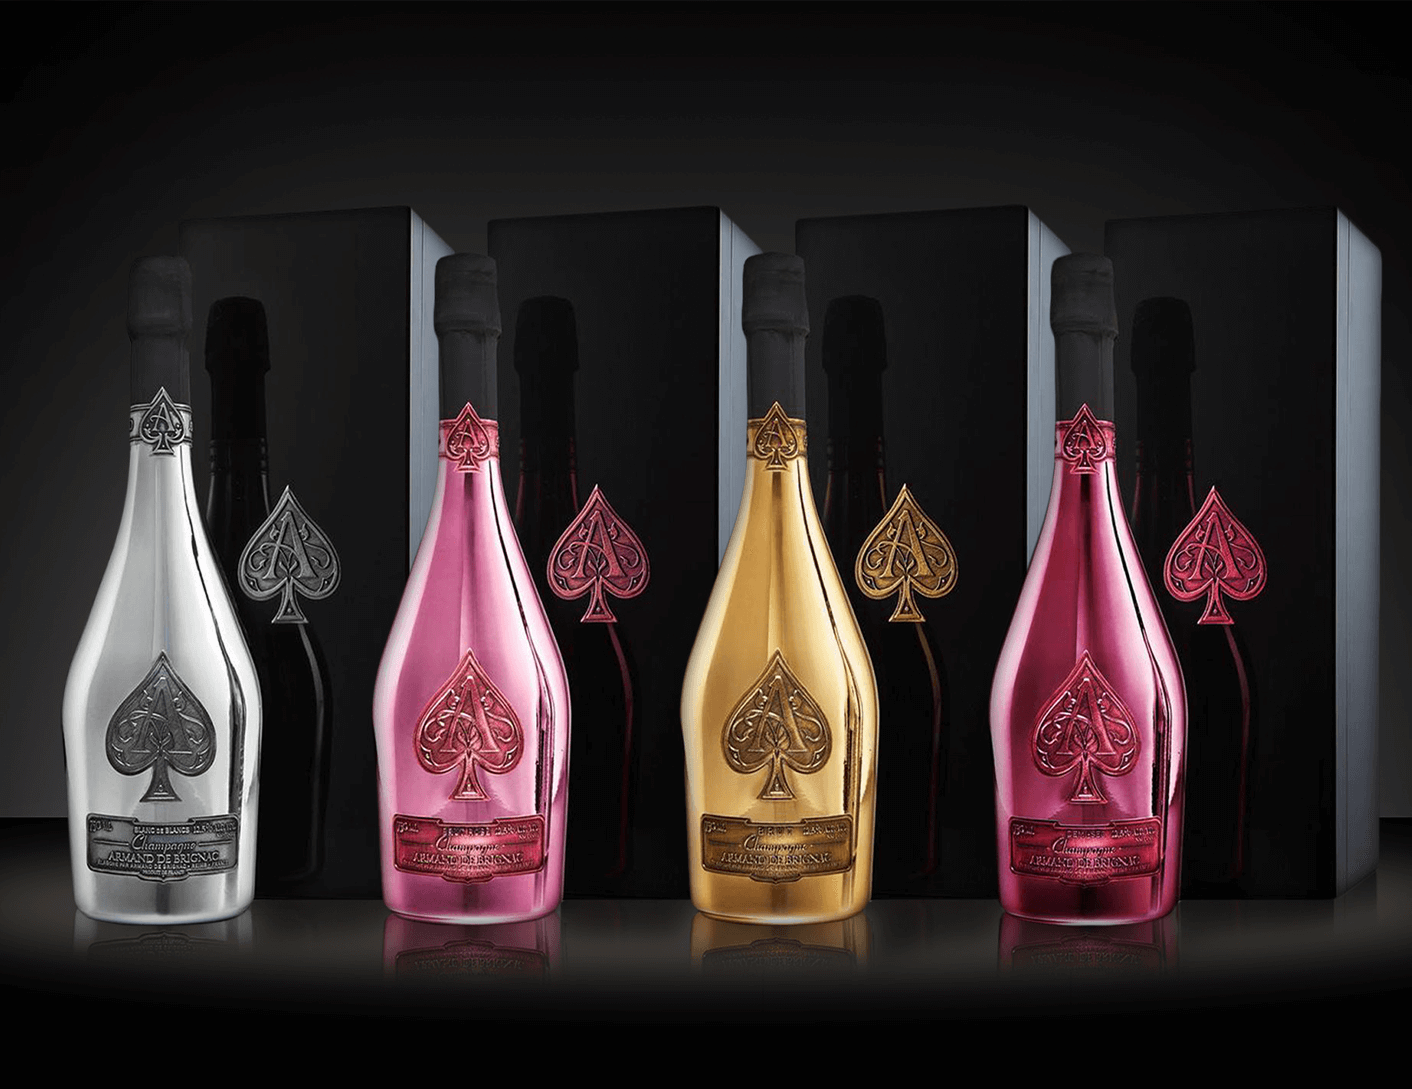 Jay Z is now the proud owner of the Armand de Brignac Champagne